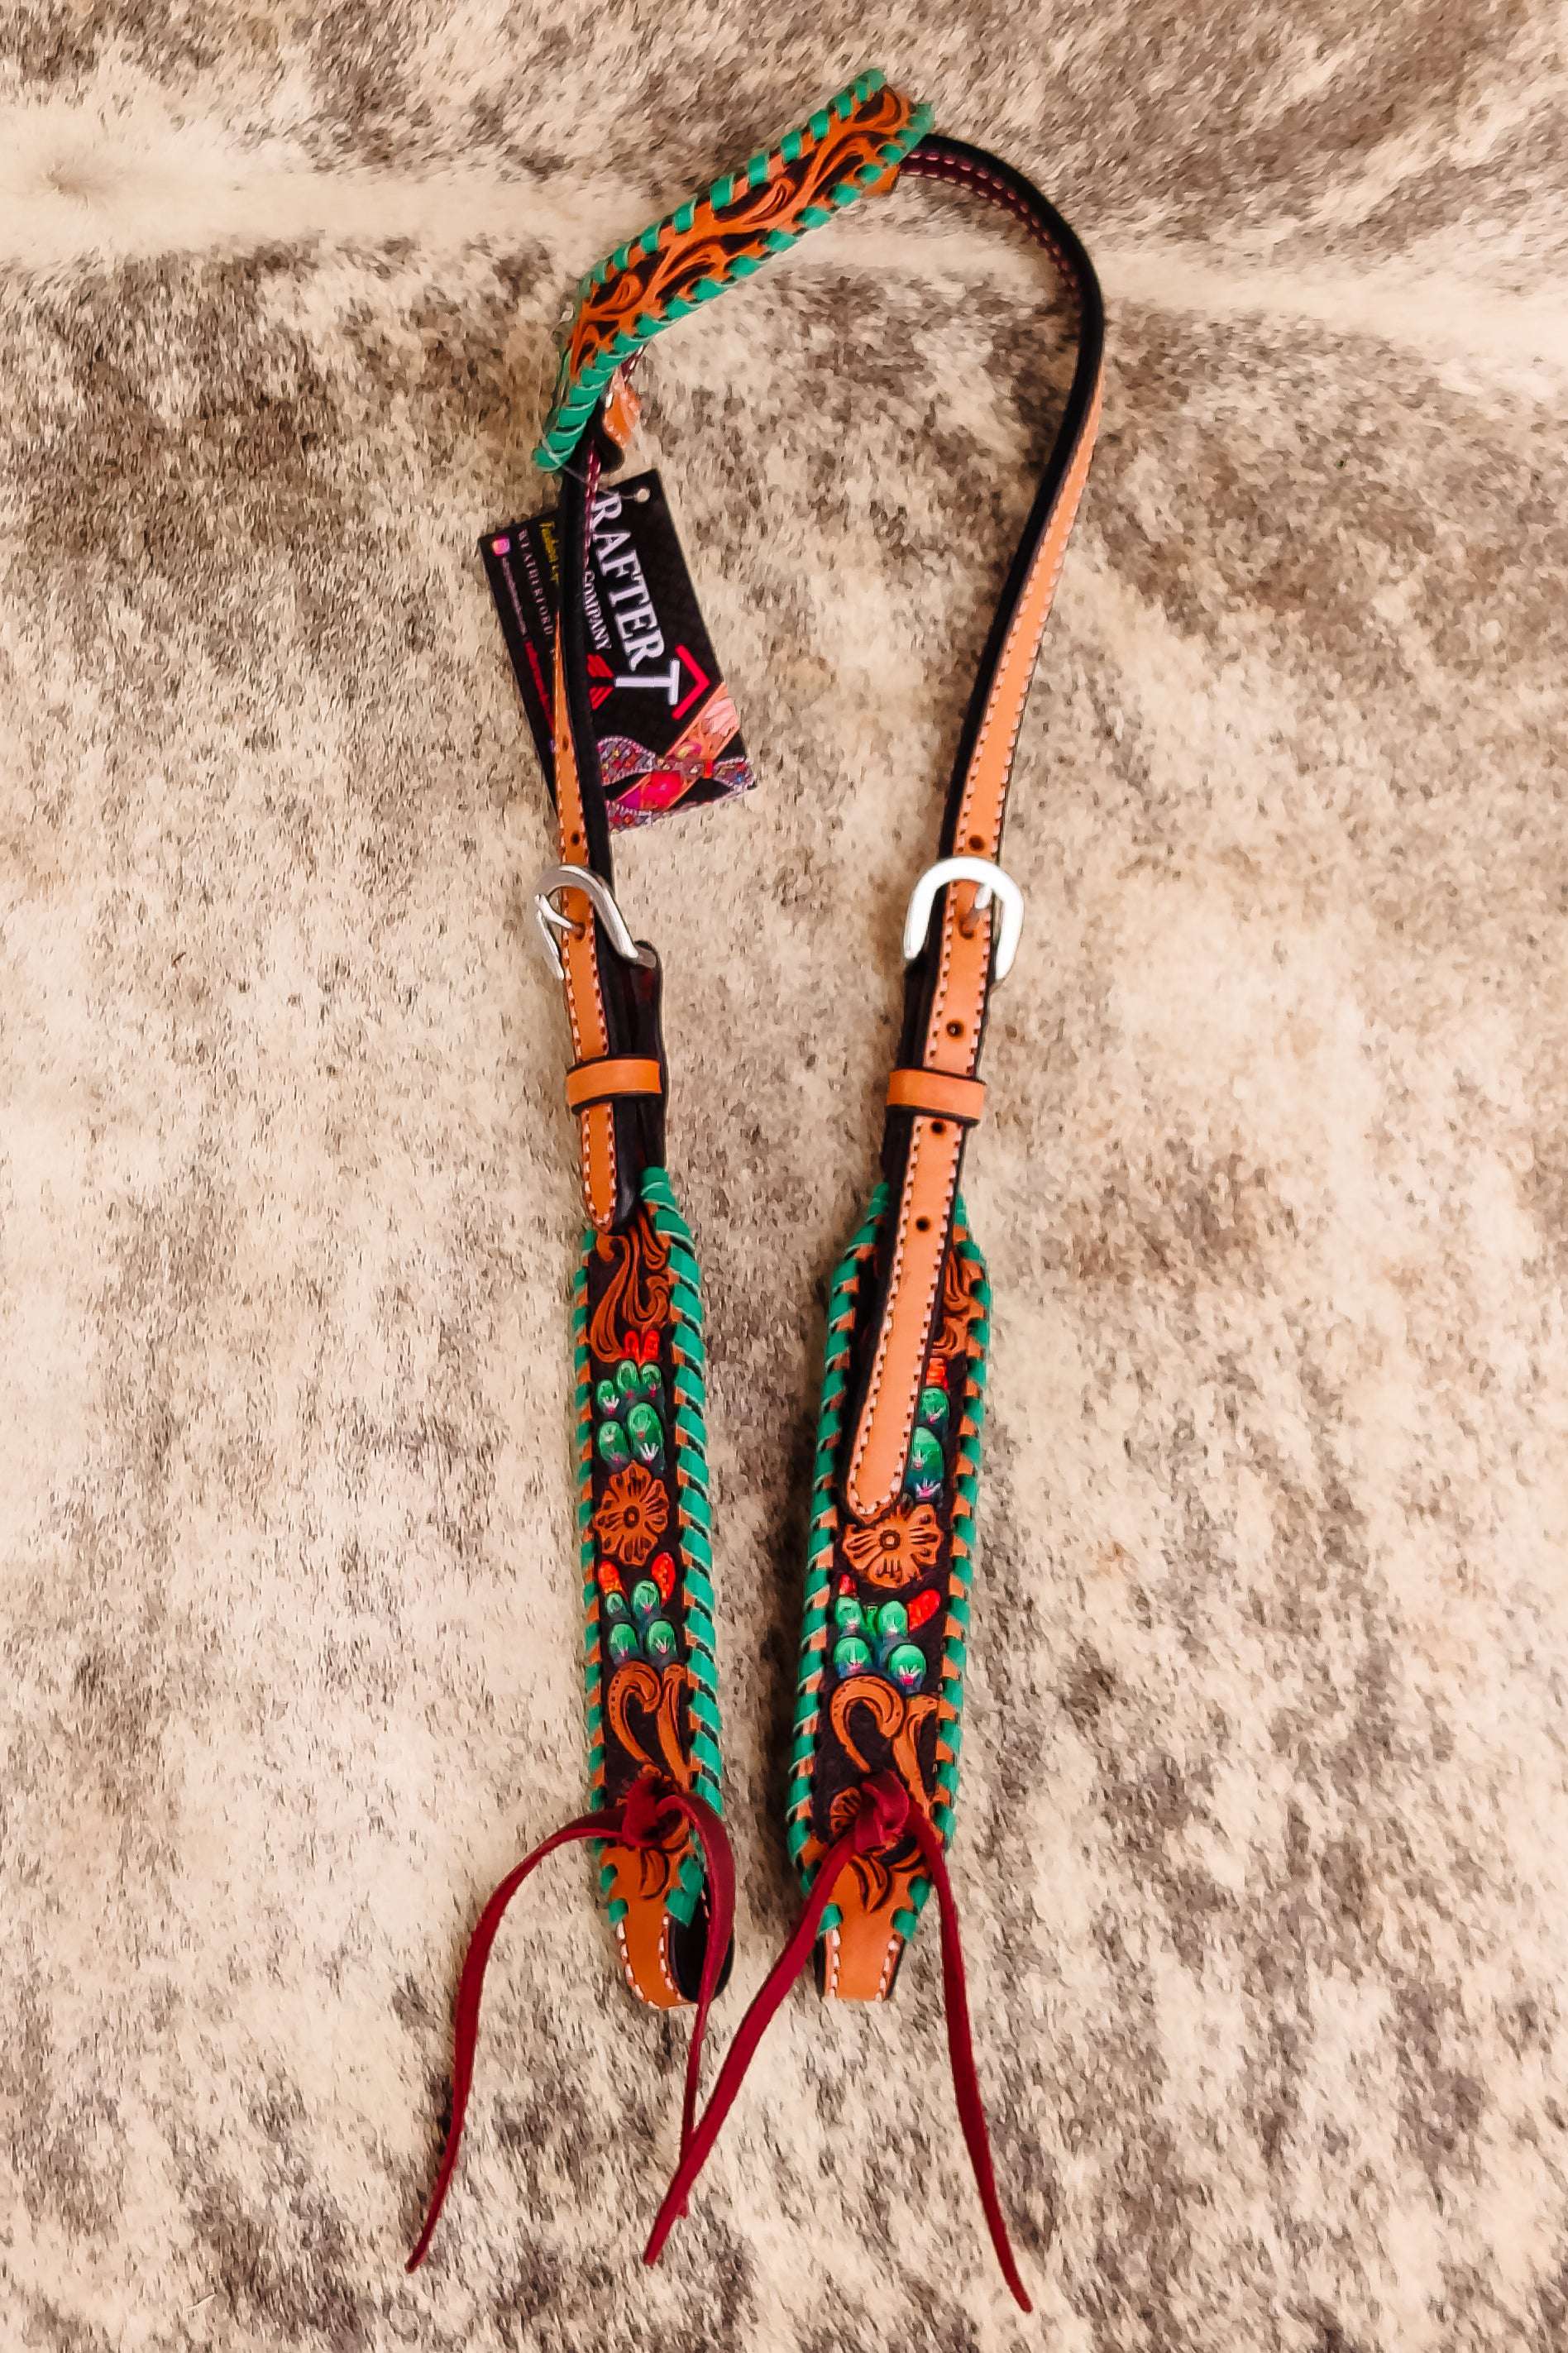 Colorful Headstalls, and more! on Instagram: I don't think you